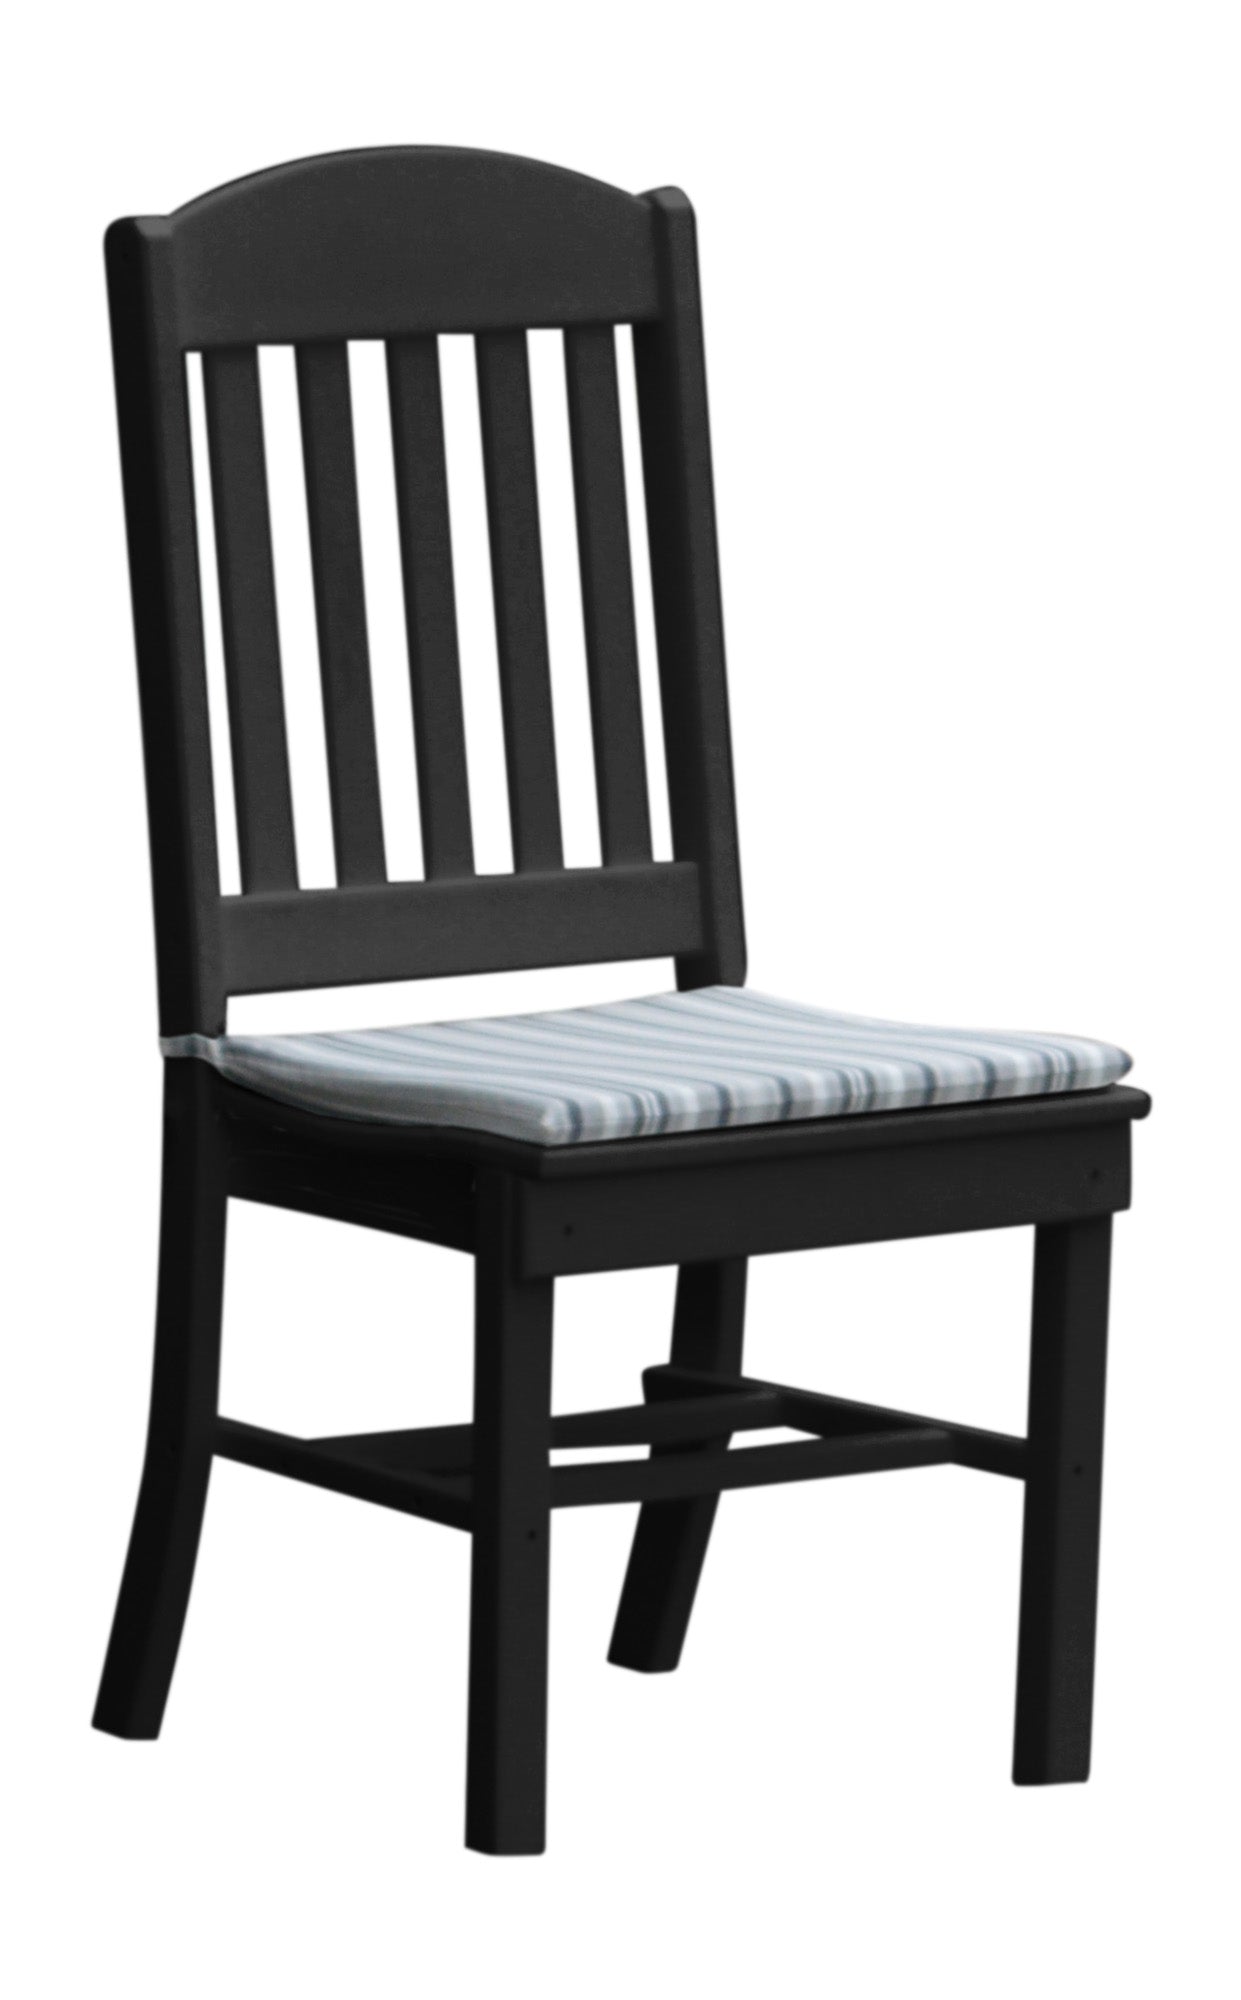 A&L Furniture Company Recycled Plastic Classic Dining Chair - Black